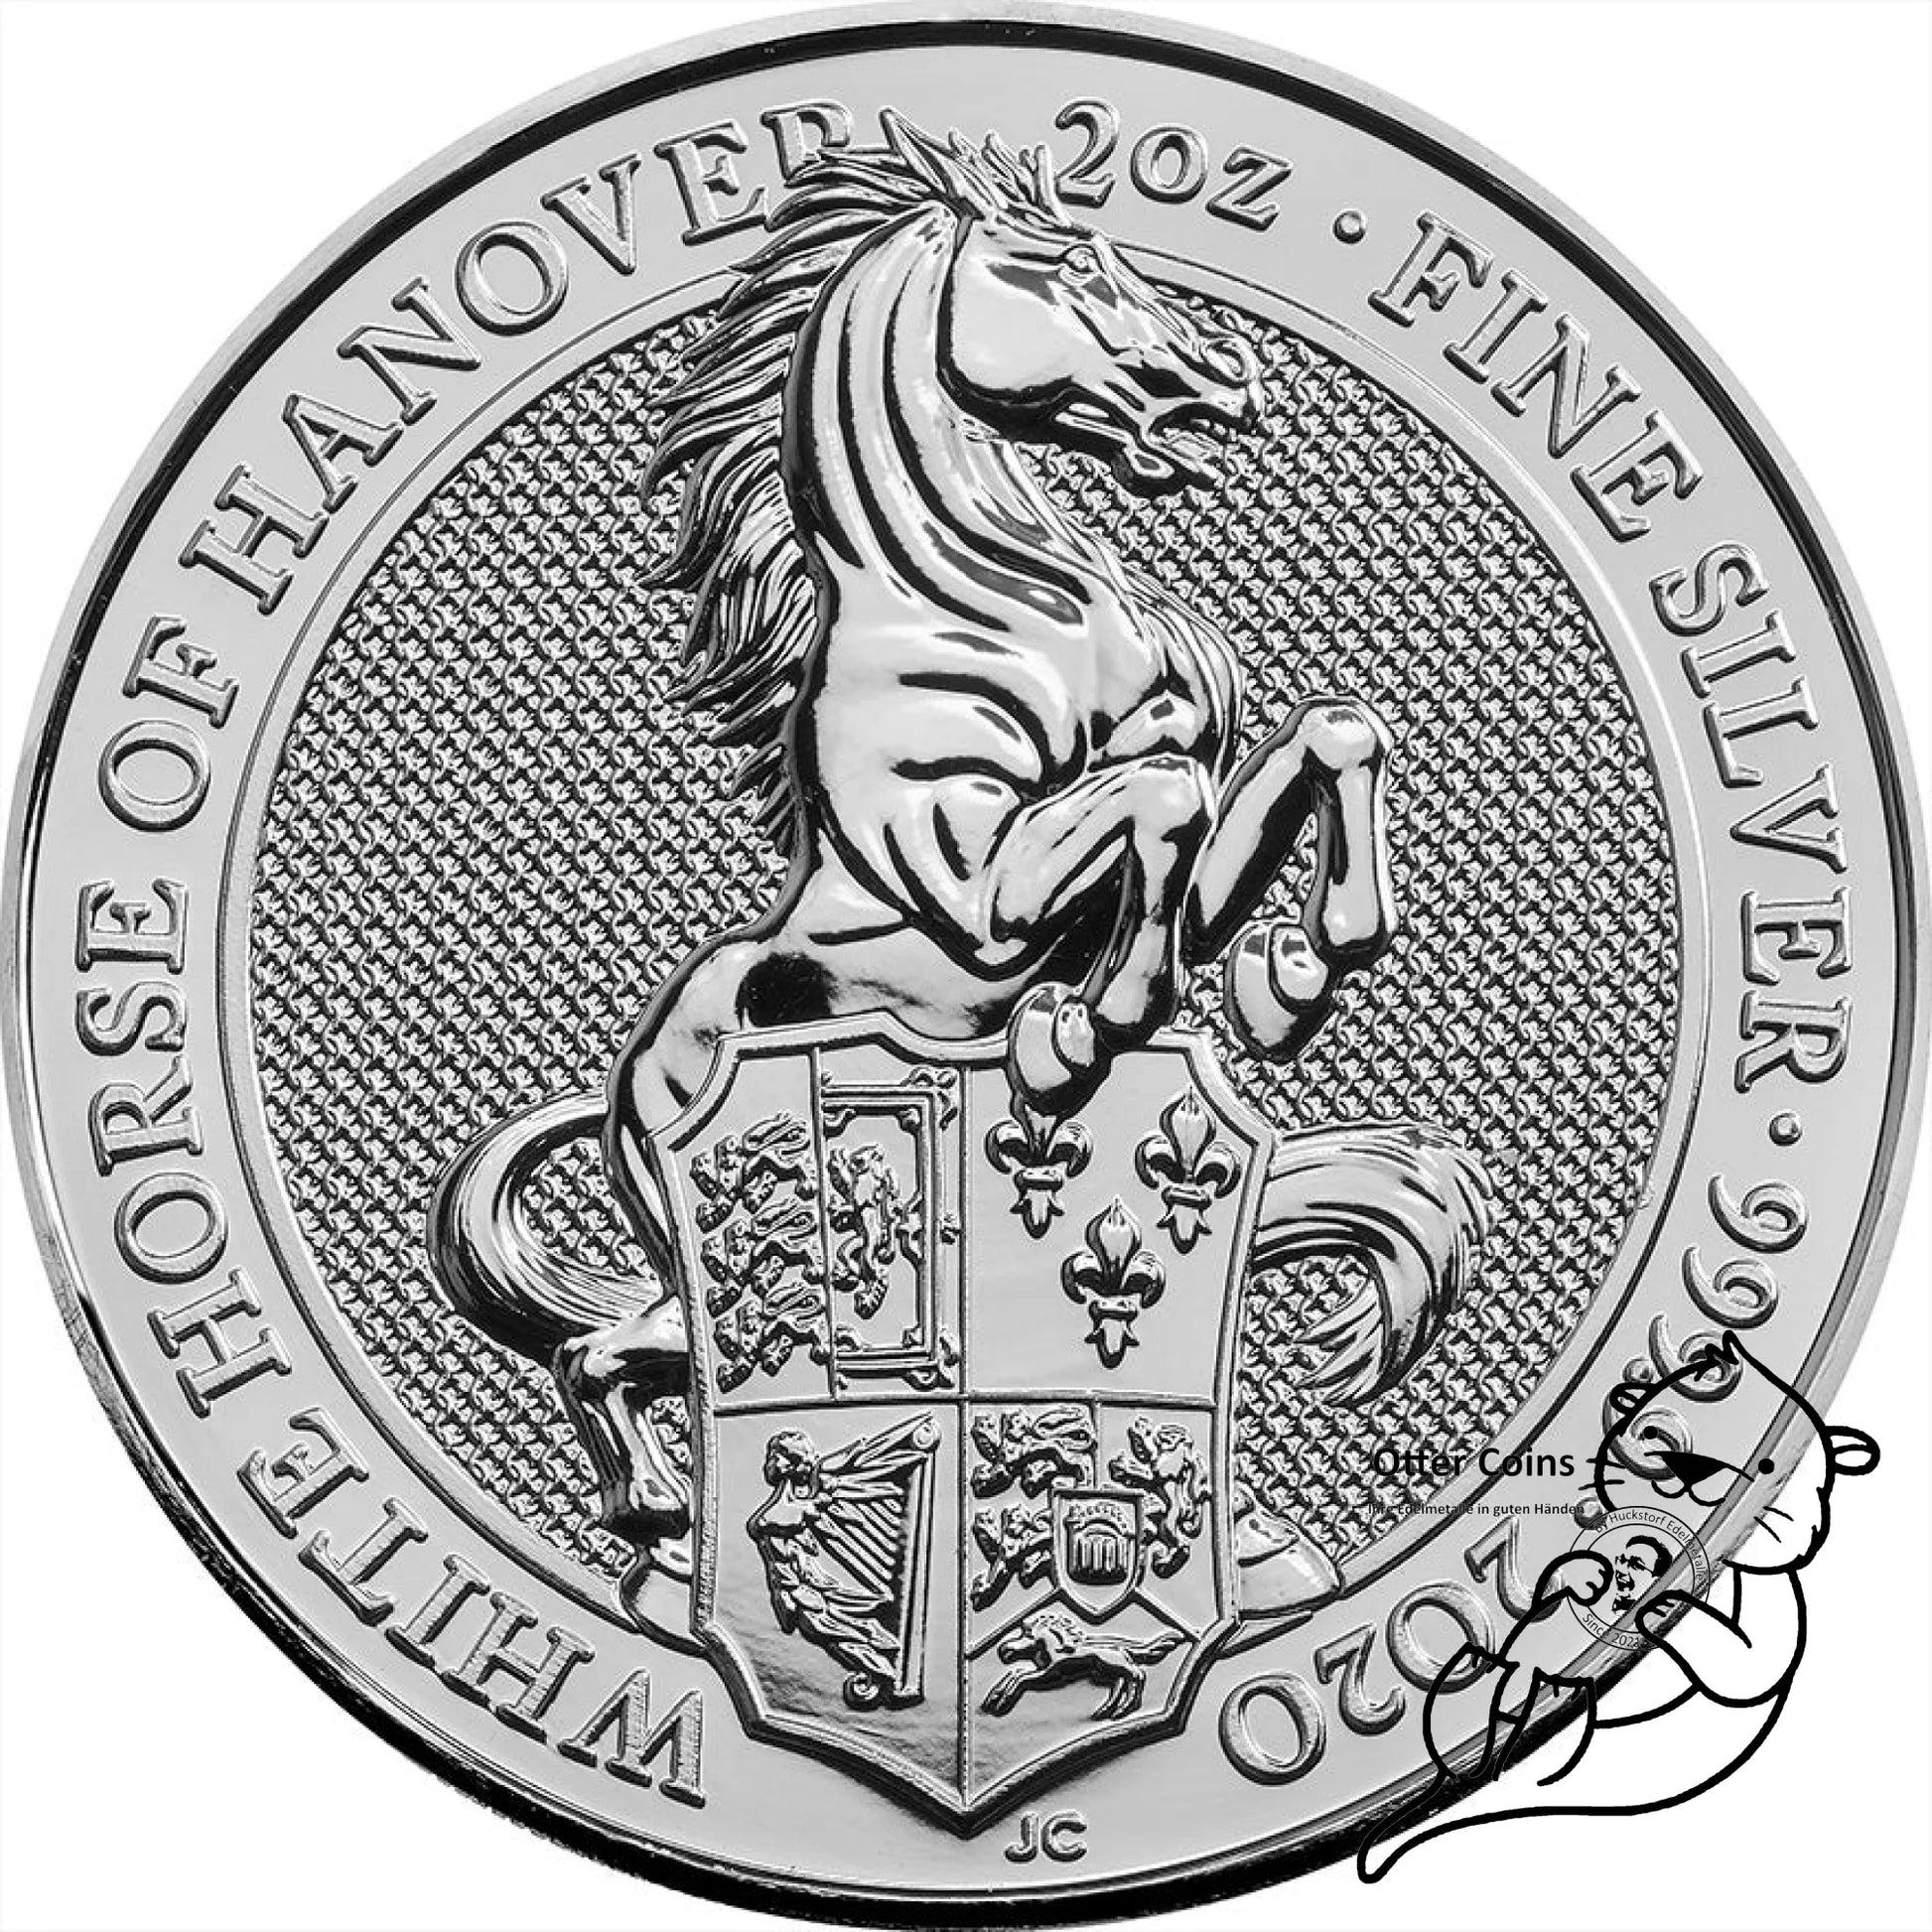 The Queen´s Beasts The White Horse of Hanover 2 Oz